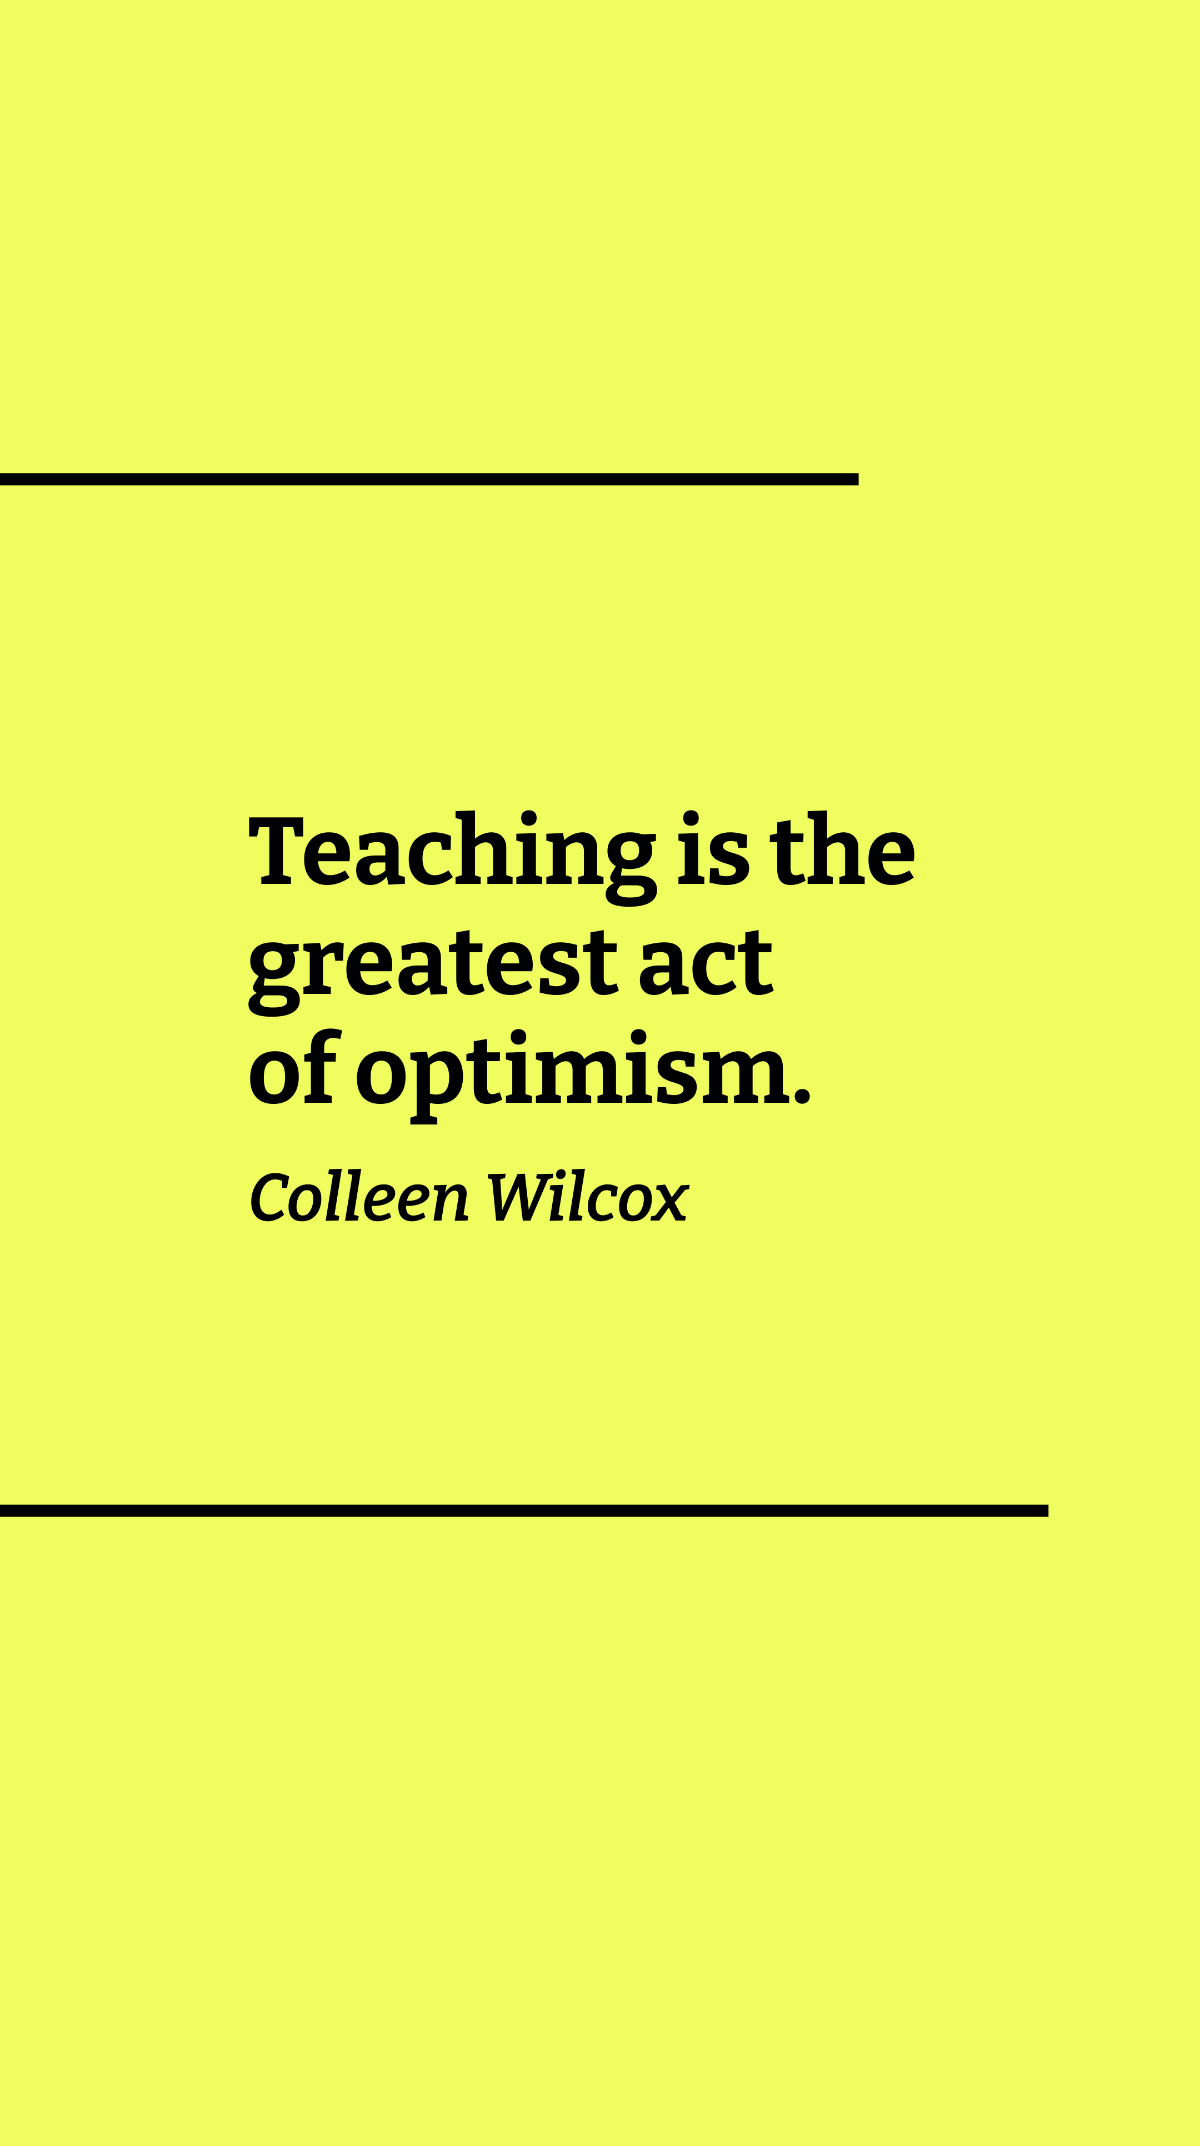 Colleen Wilcox - Teaching is the greatest act of optimism.